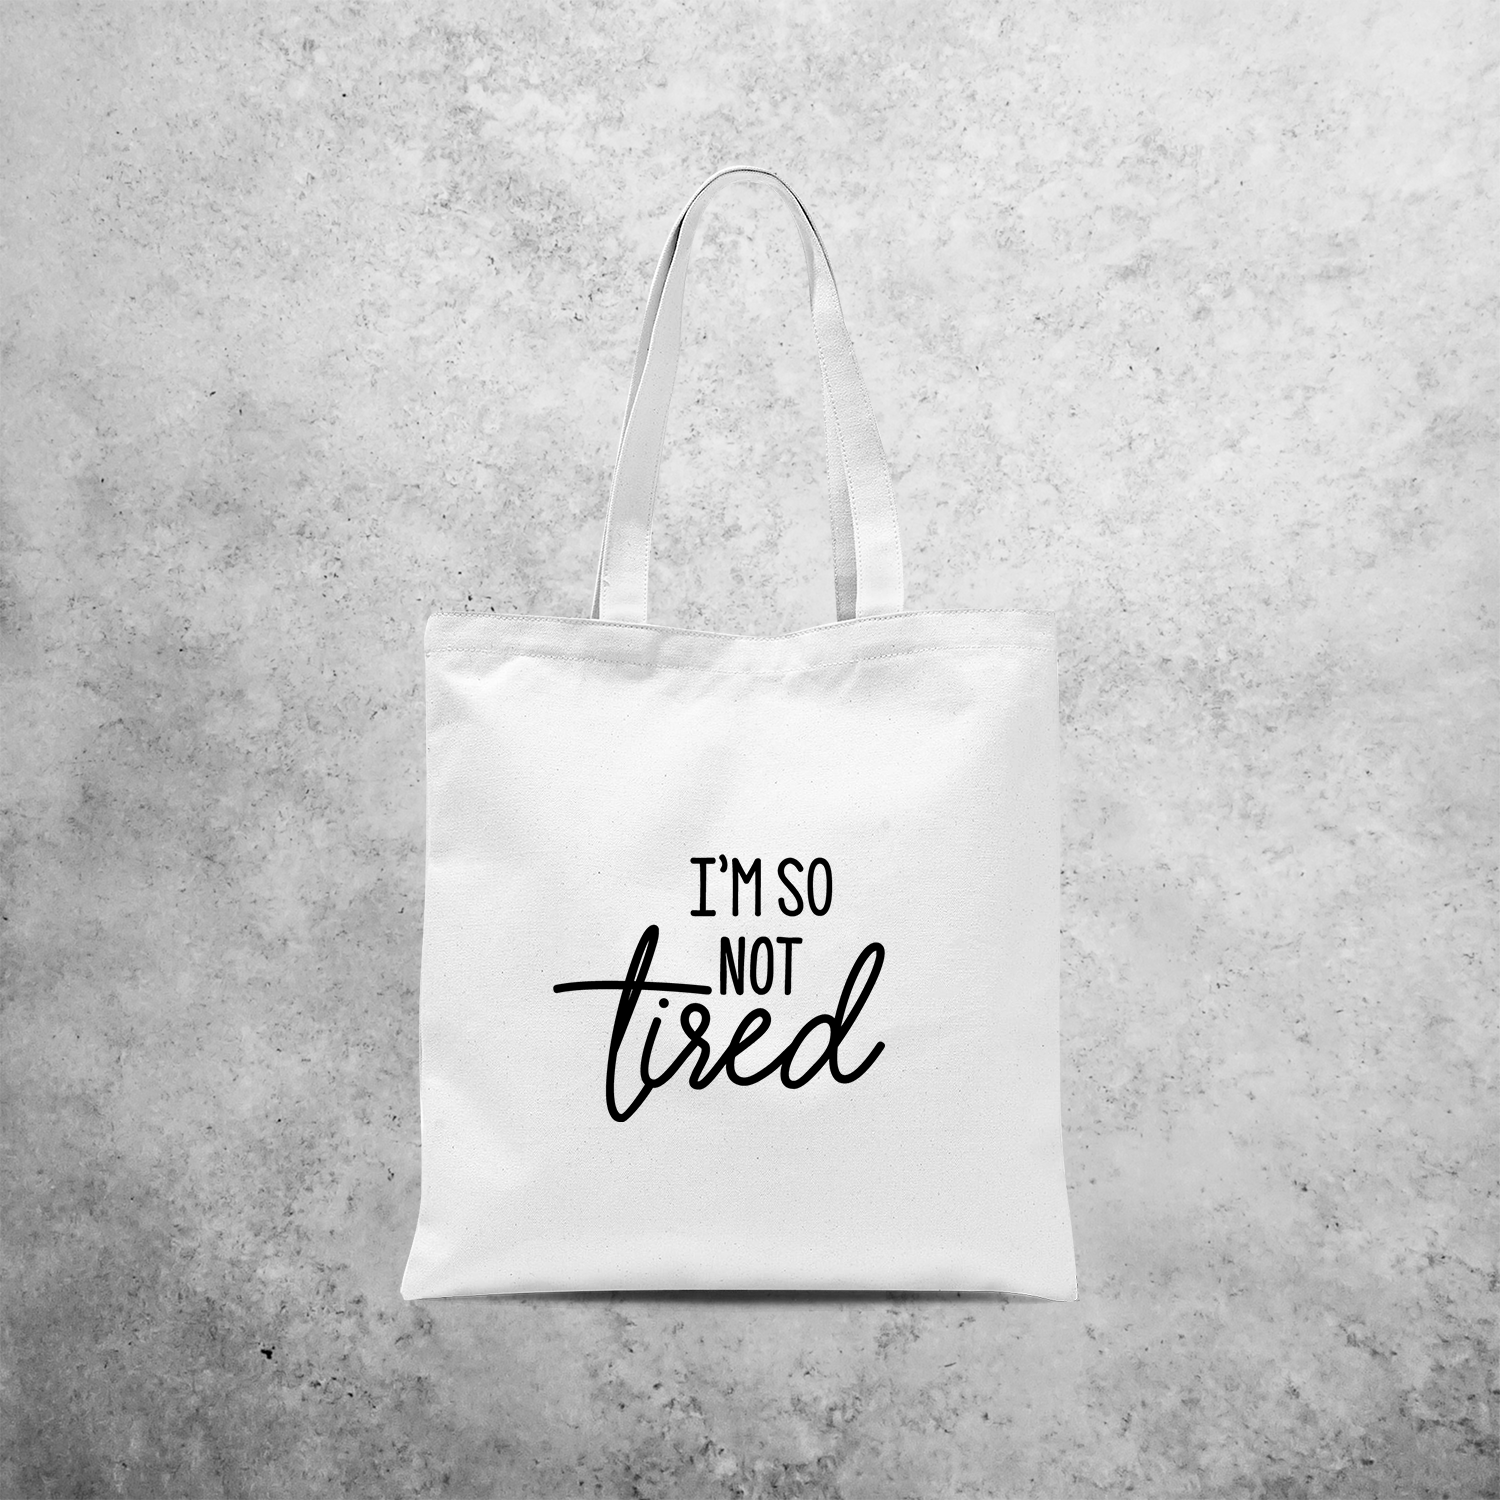 'I'm so not tired' tote bag